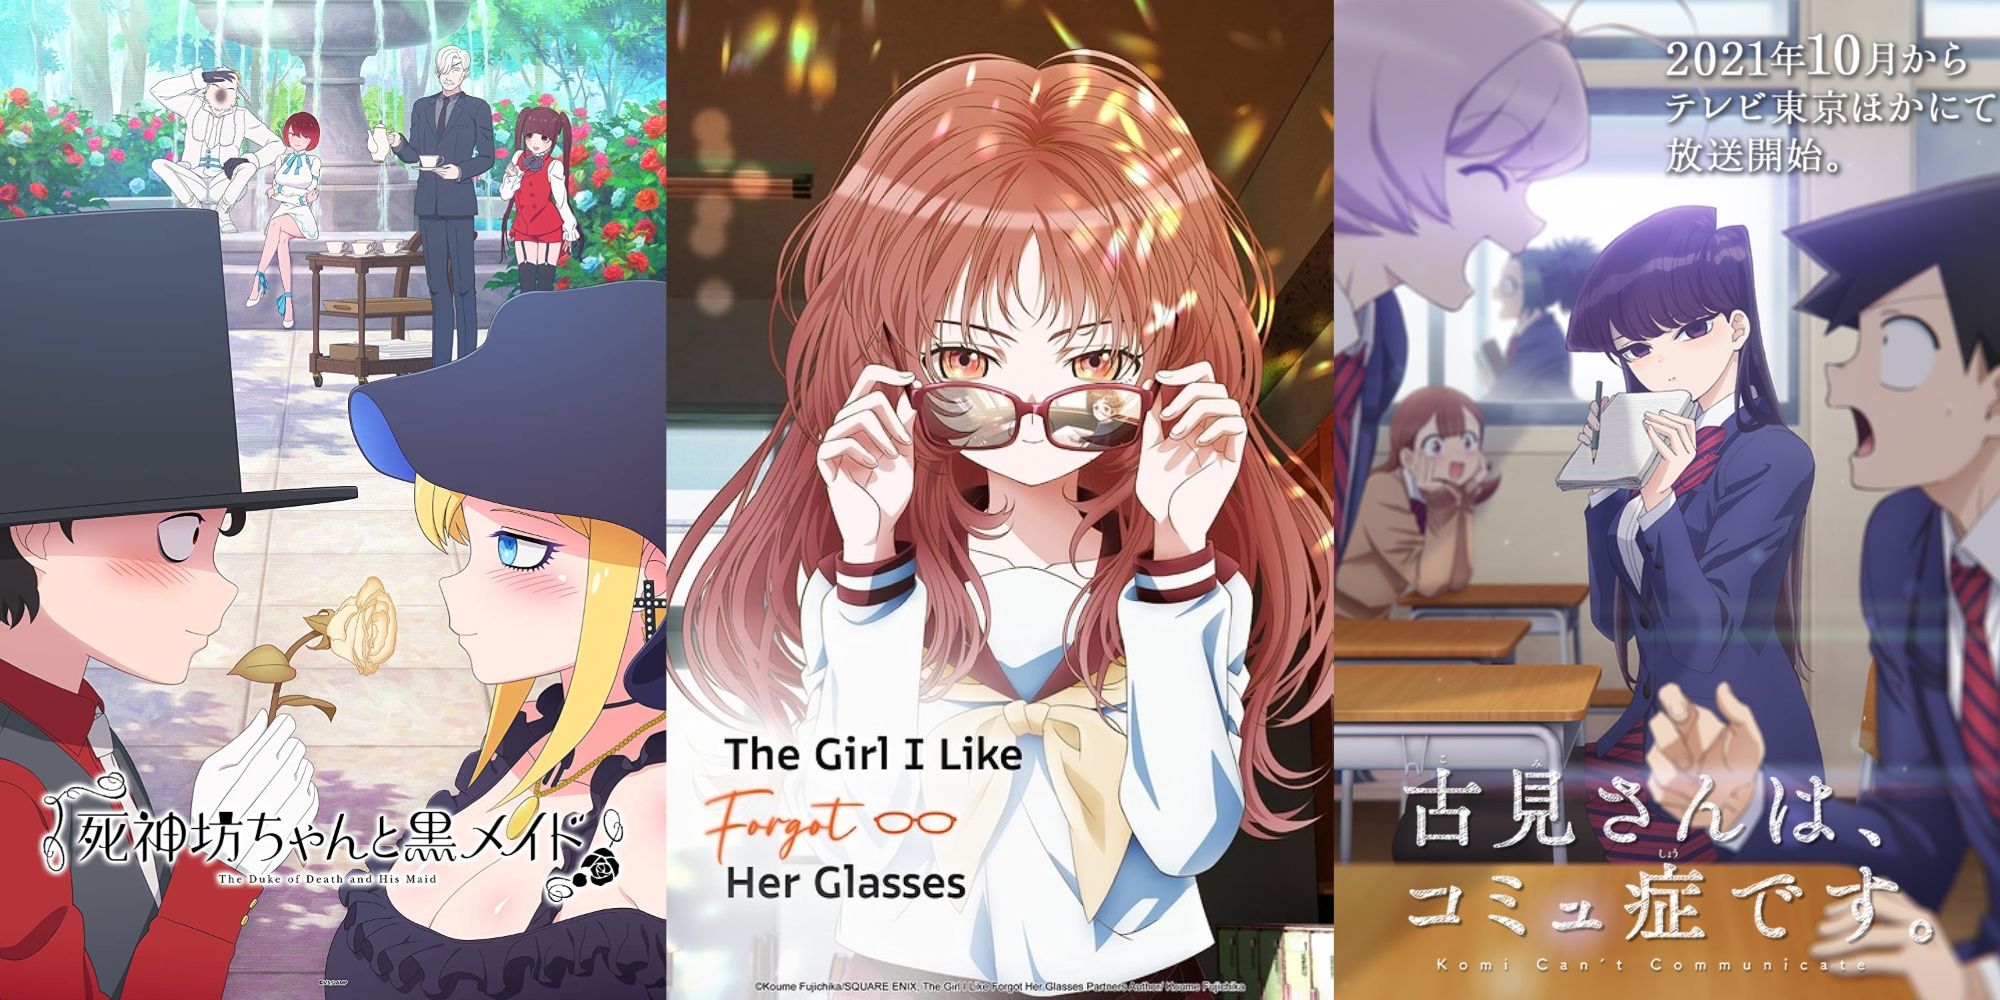 Anime To Watch If You Love The Girl I Like Forgot Her Glasses featured image